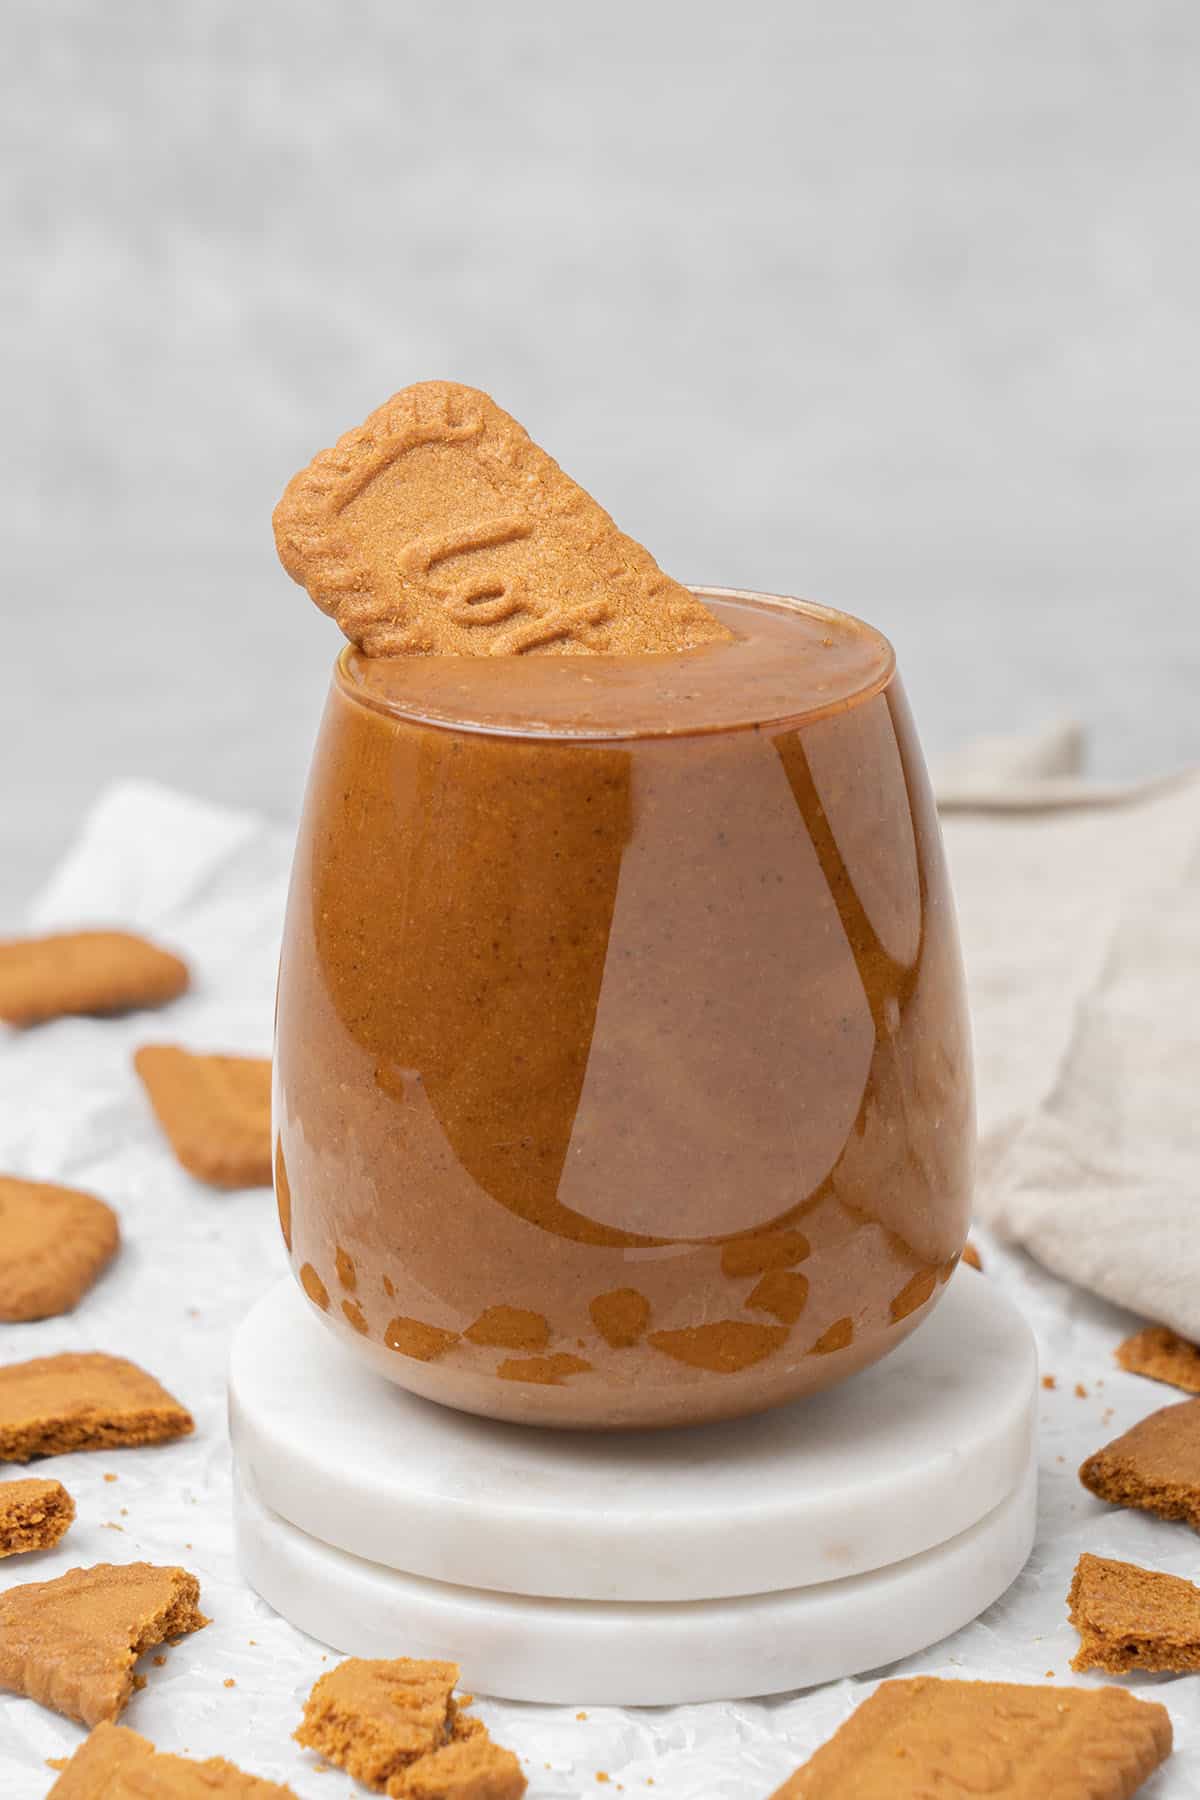 Lotus Biscoff spread in a glass.